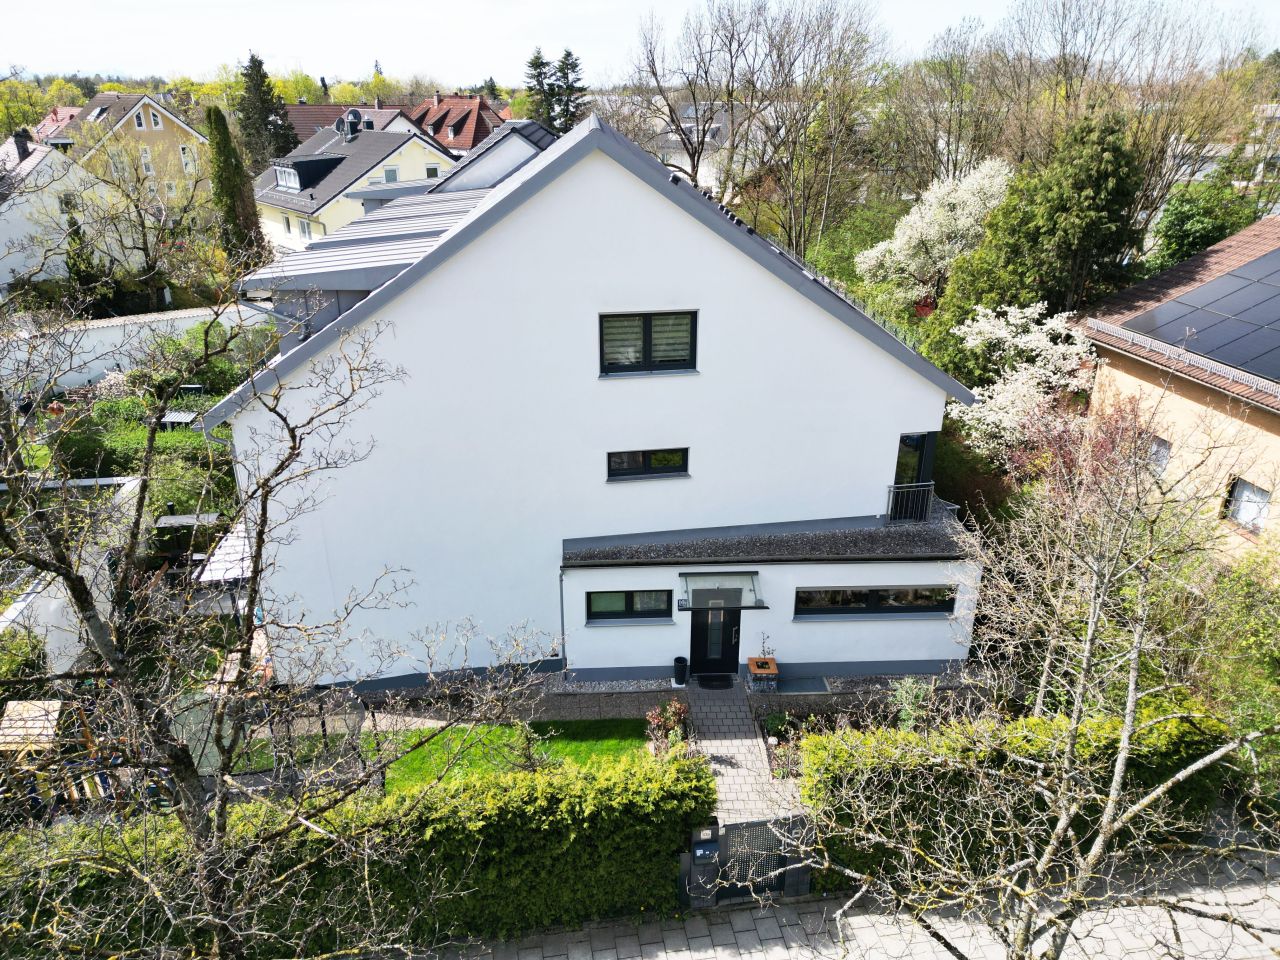 House in Munich, Germany, 164 sq.m - picture 1